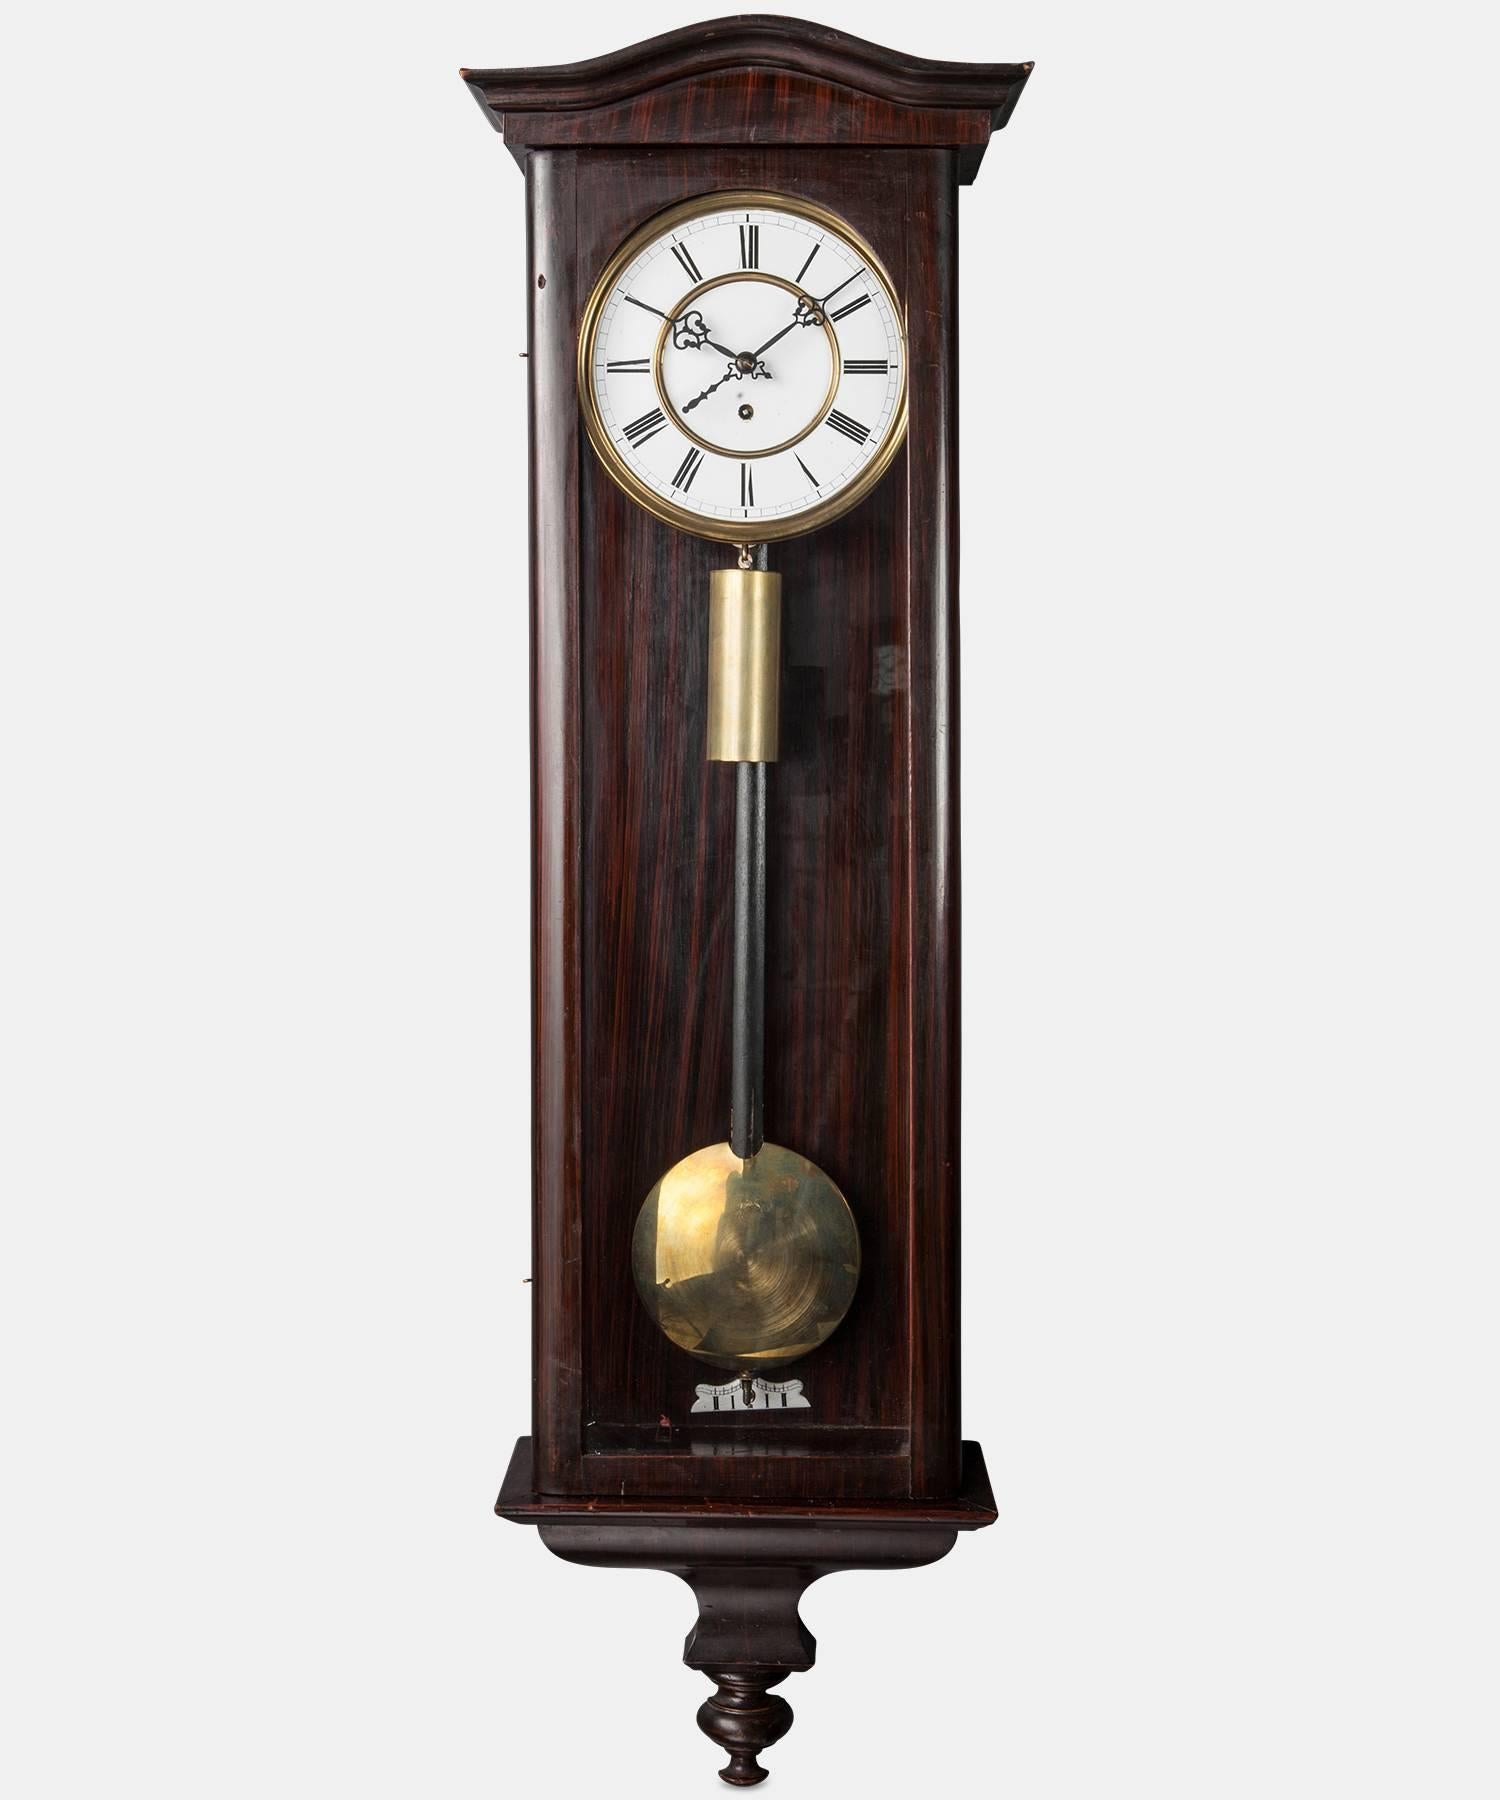 Clock with walnut frame, porcelain face and solid brass weight.

Made in America circa 1920.